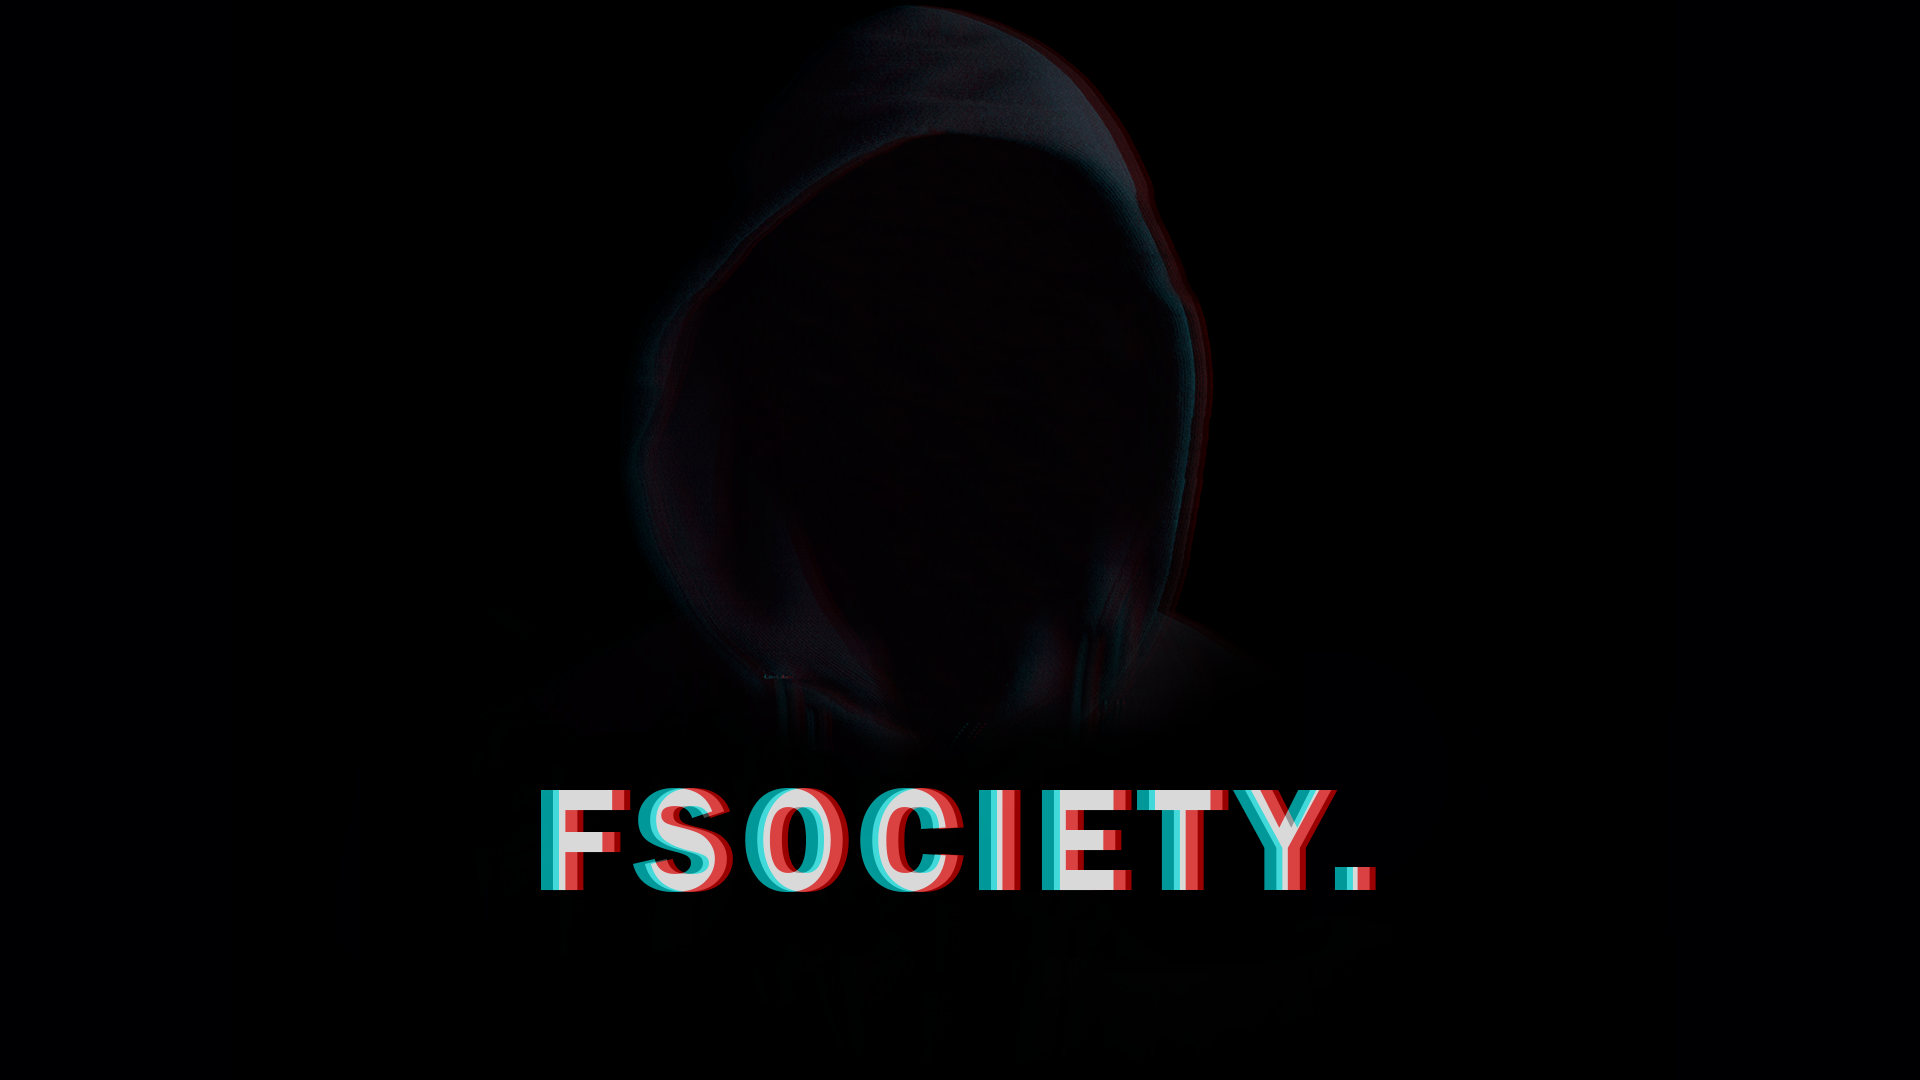 F Society, HD Tv Shows, 4k Wallpaper, Image, Background, Photo